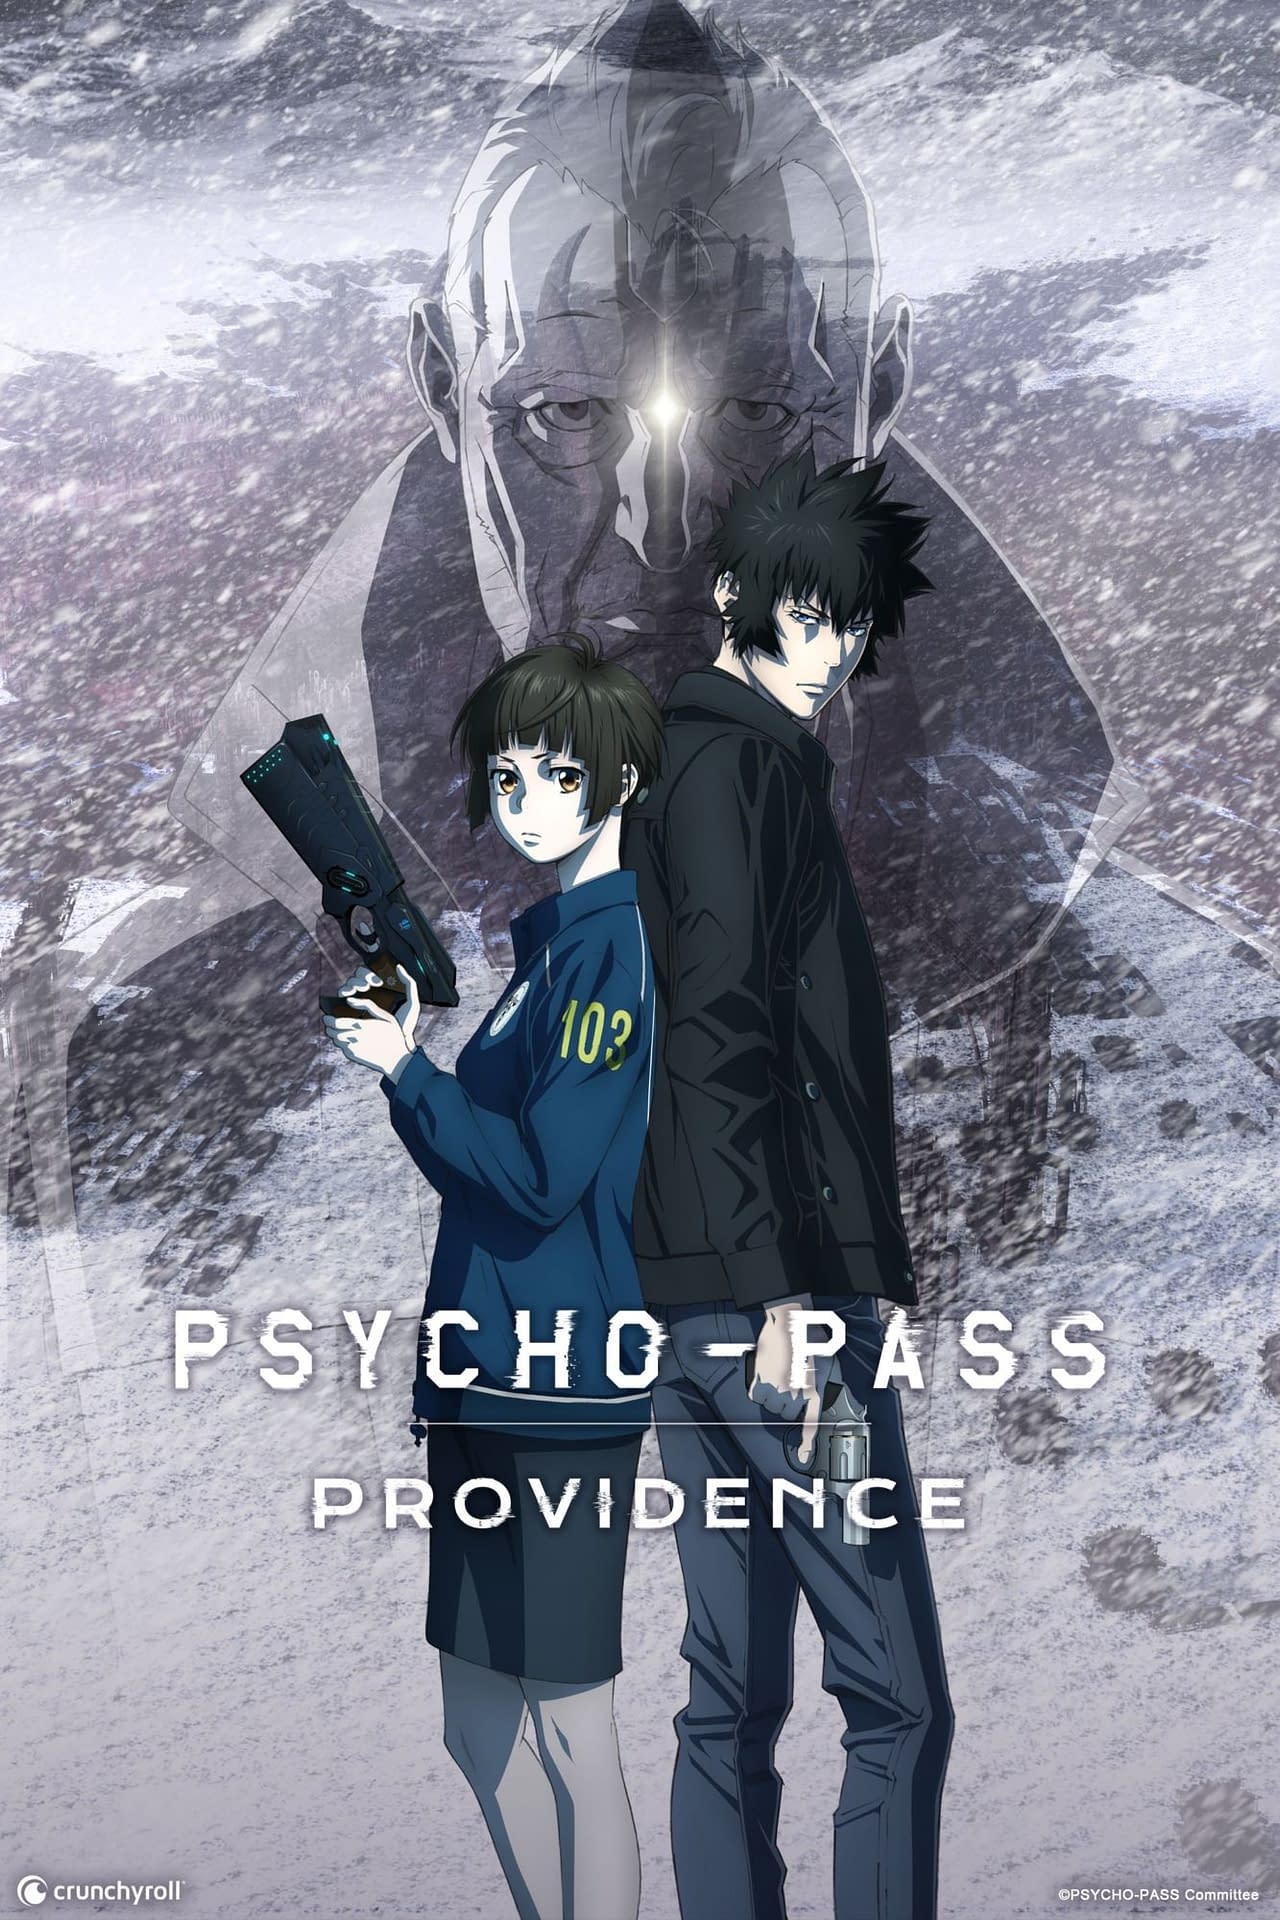 PSYCHOPASS Providence Gets Preview Clip Courtesy of Crunchyroll